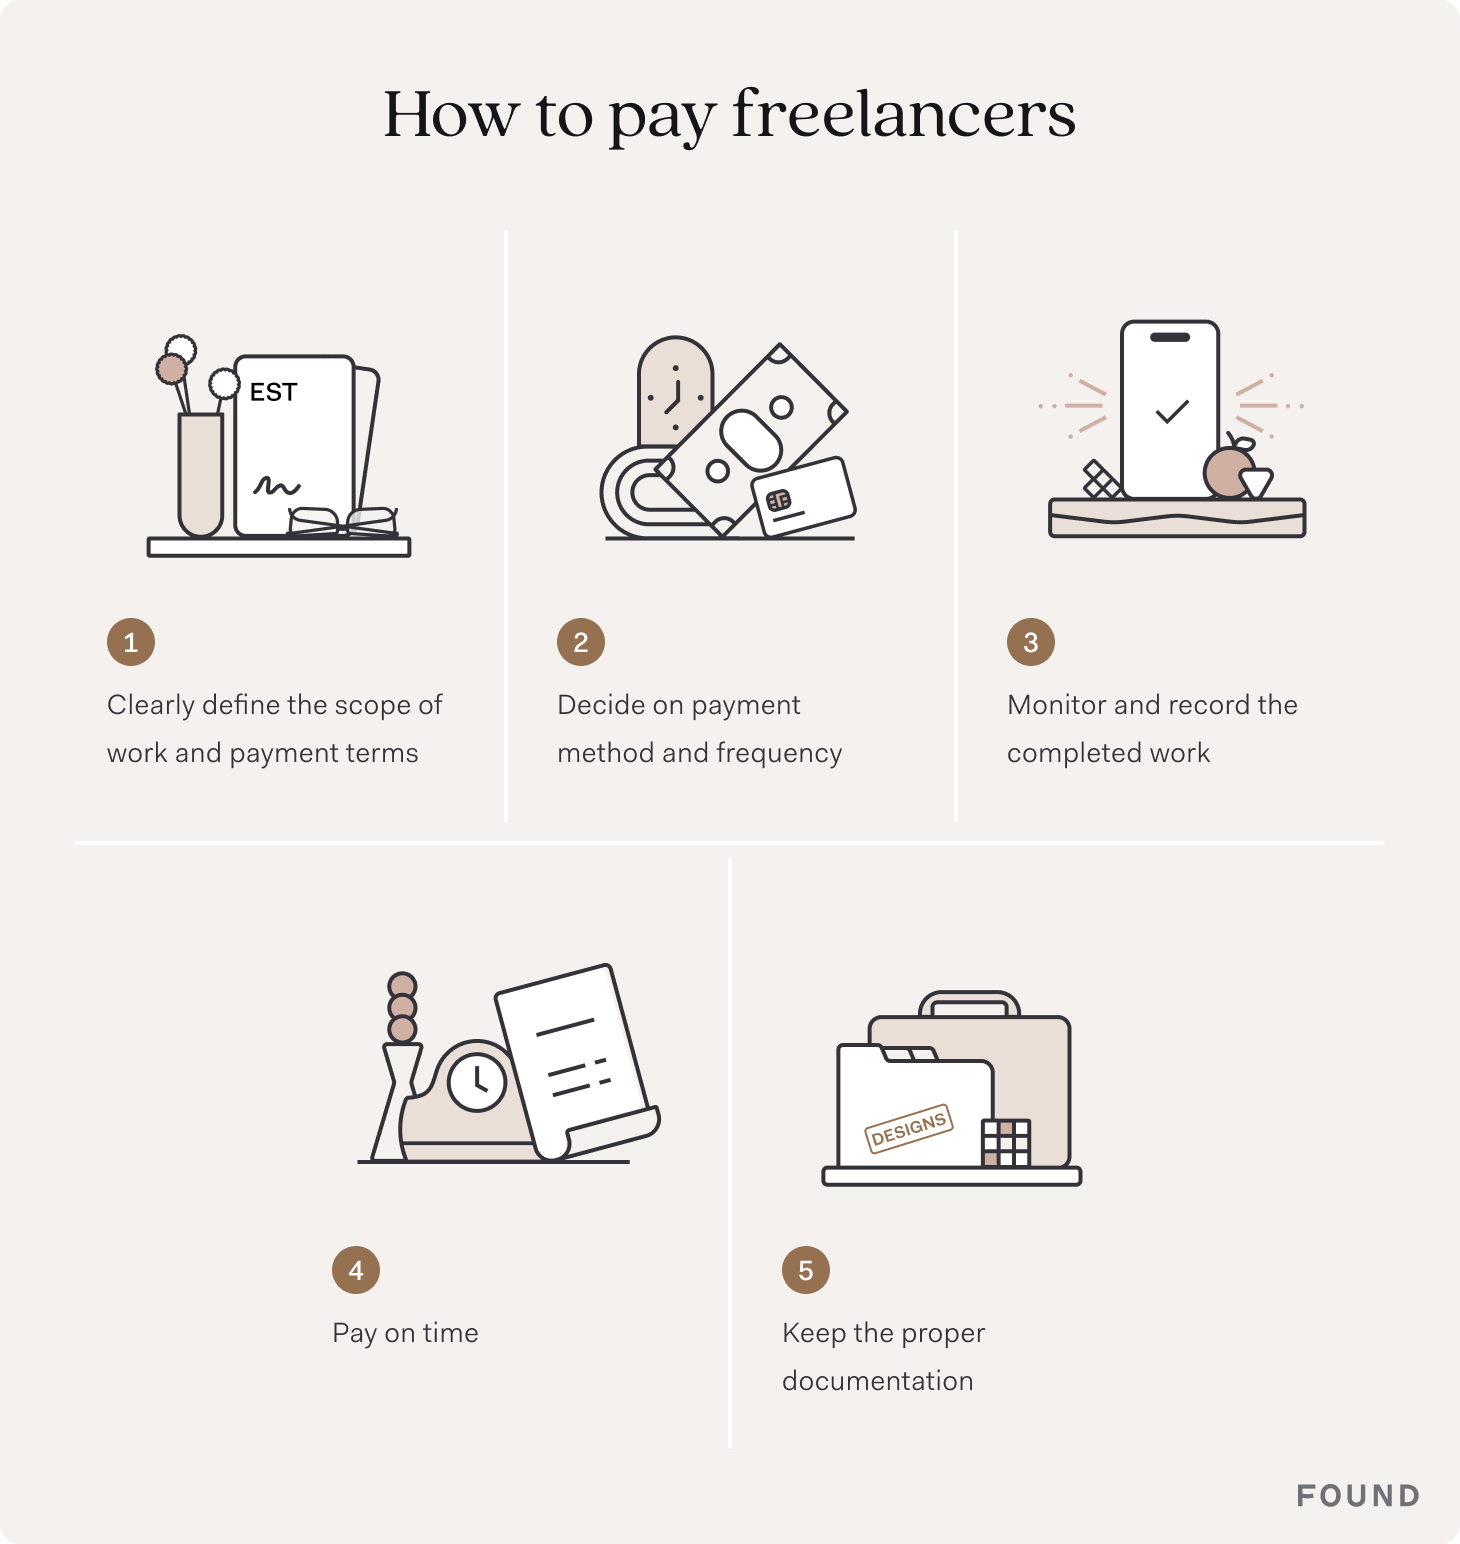 What's the best way to pay freelancers?